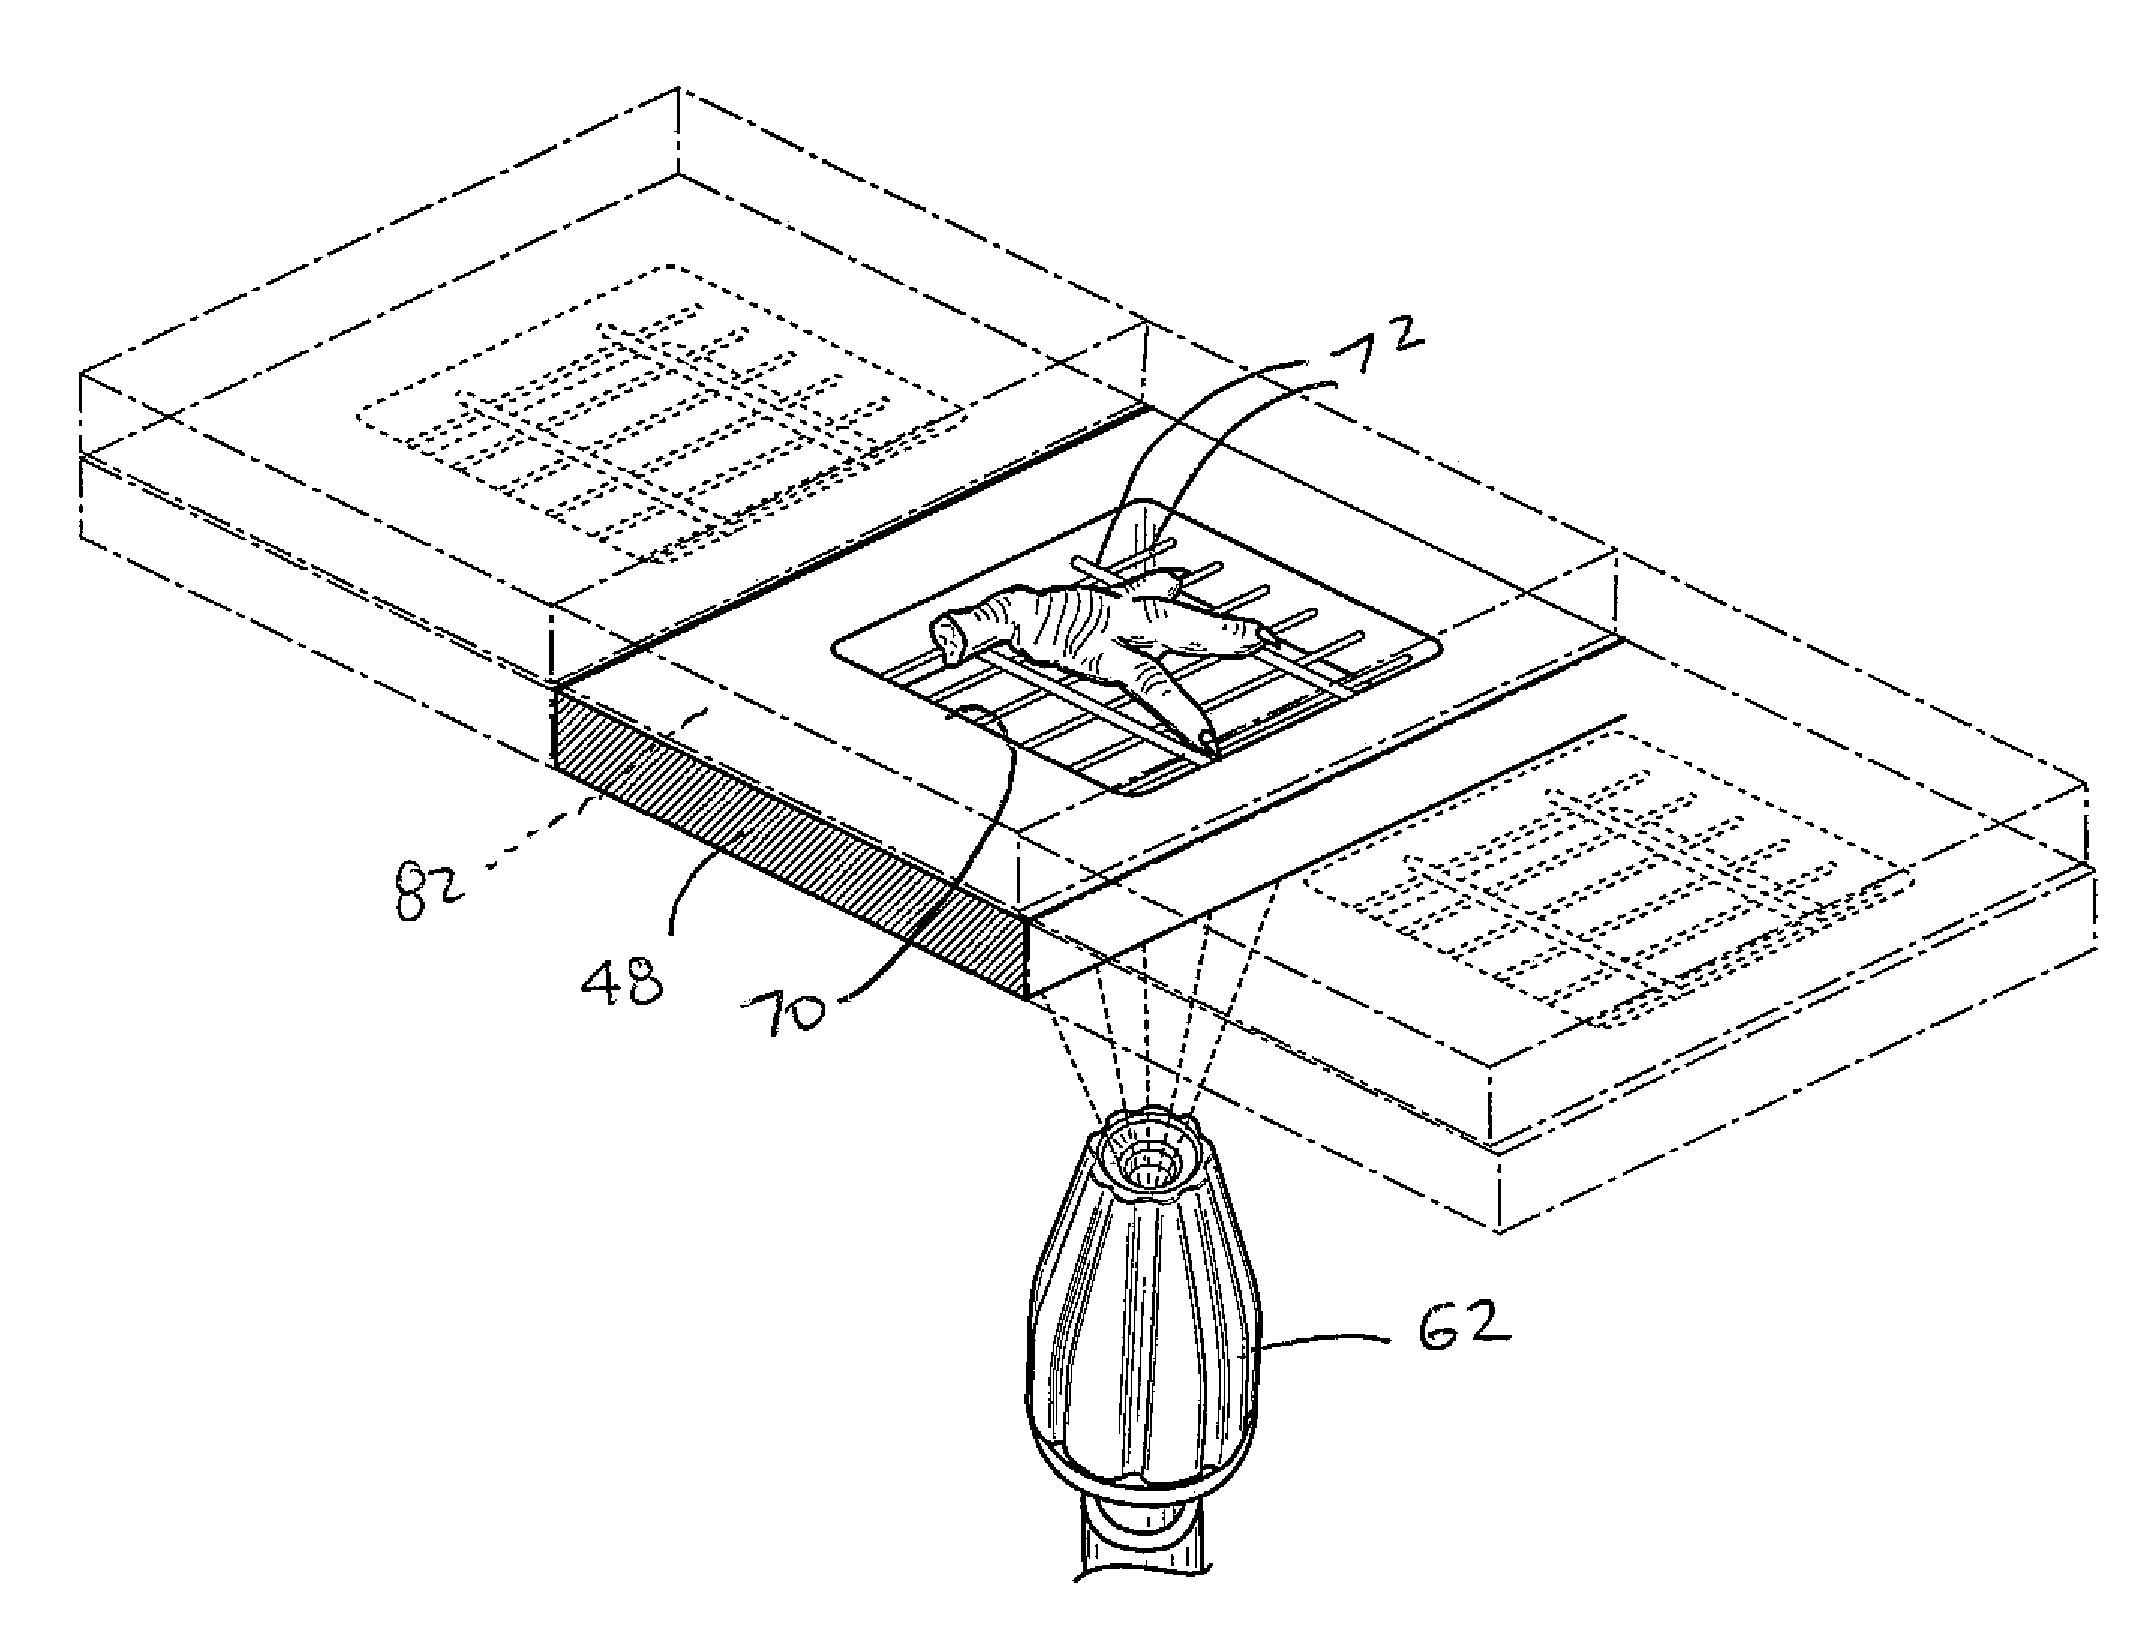 Device for removing material from feet of poultry